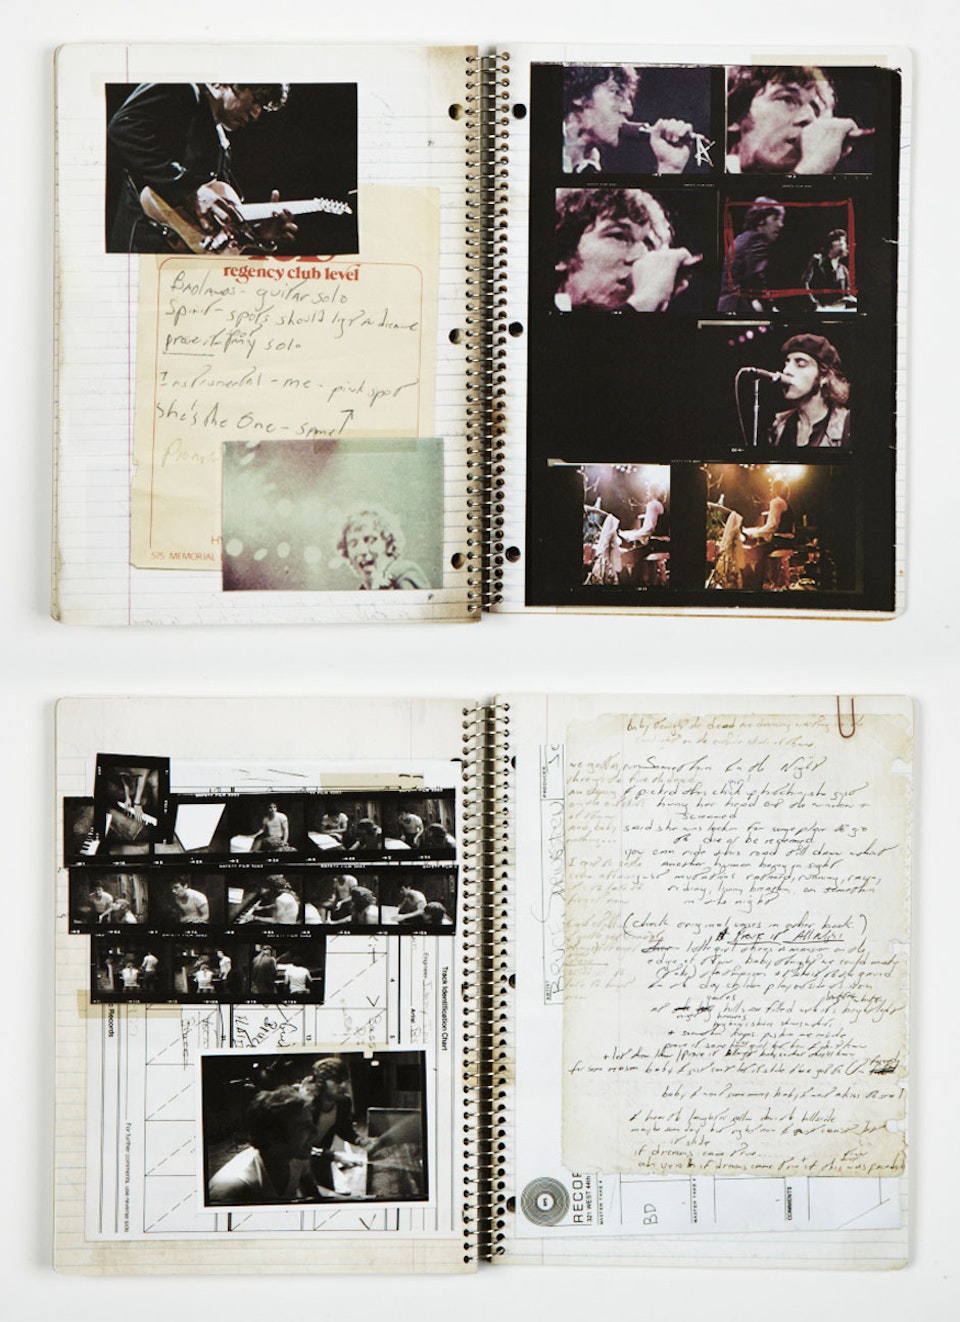 Grammy winning Darkness on the Edge of Town - Notebook spreads